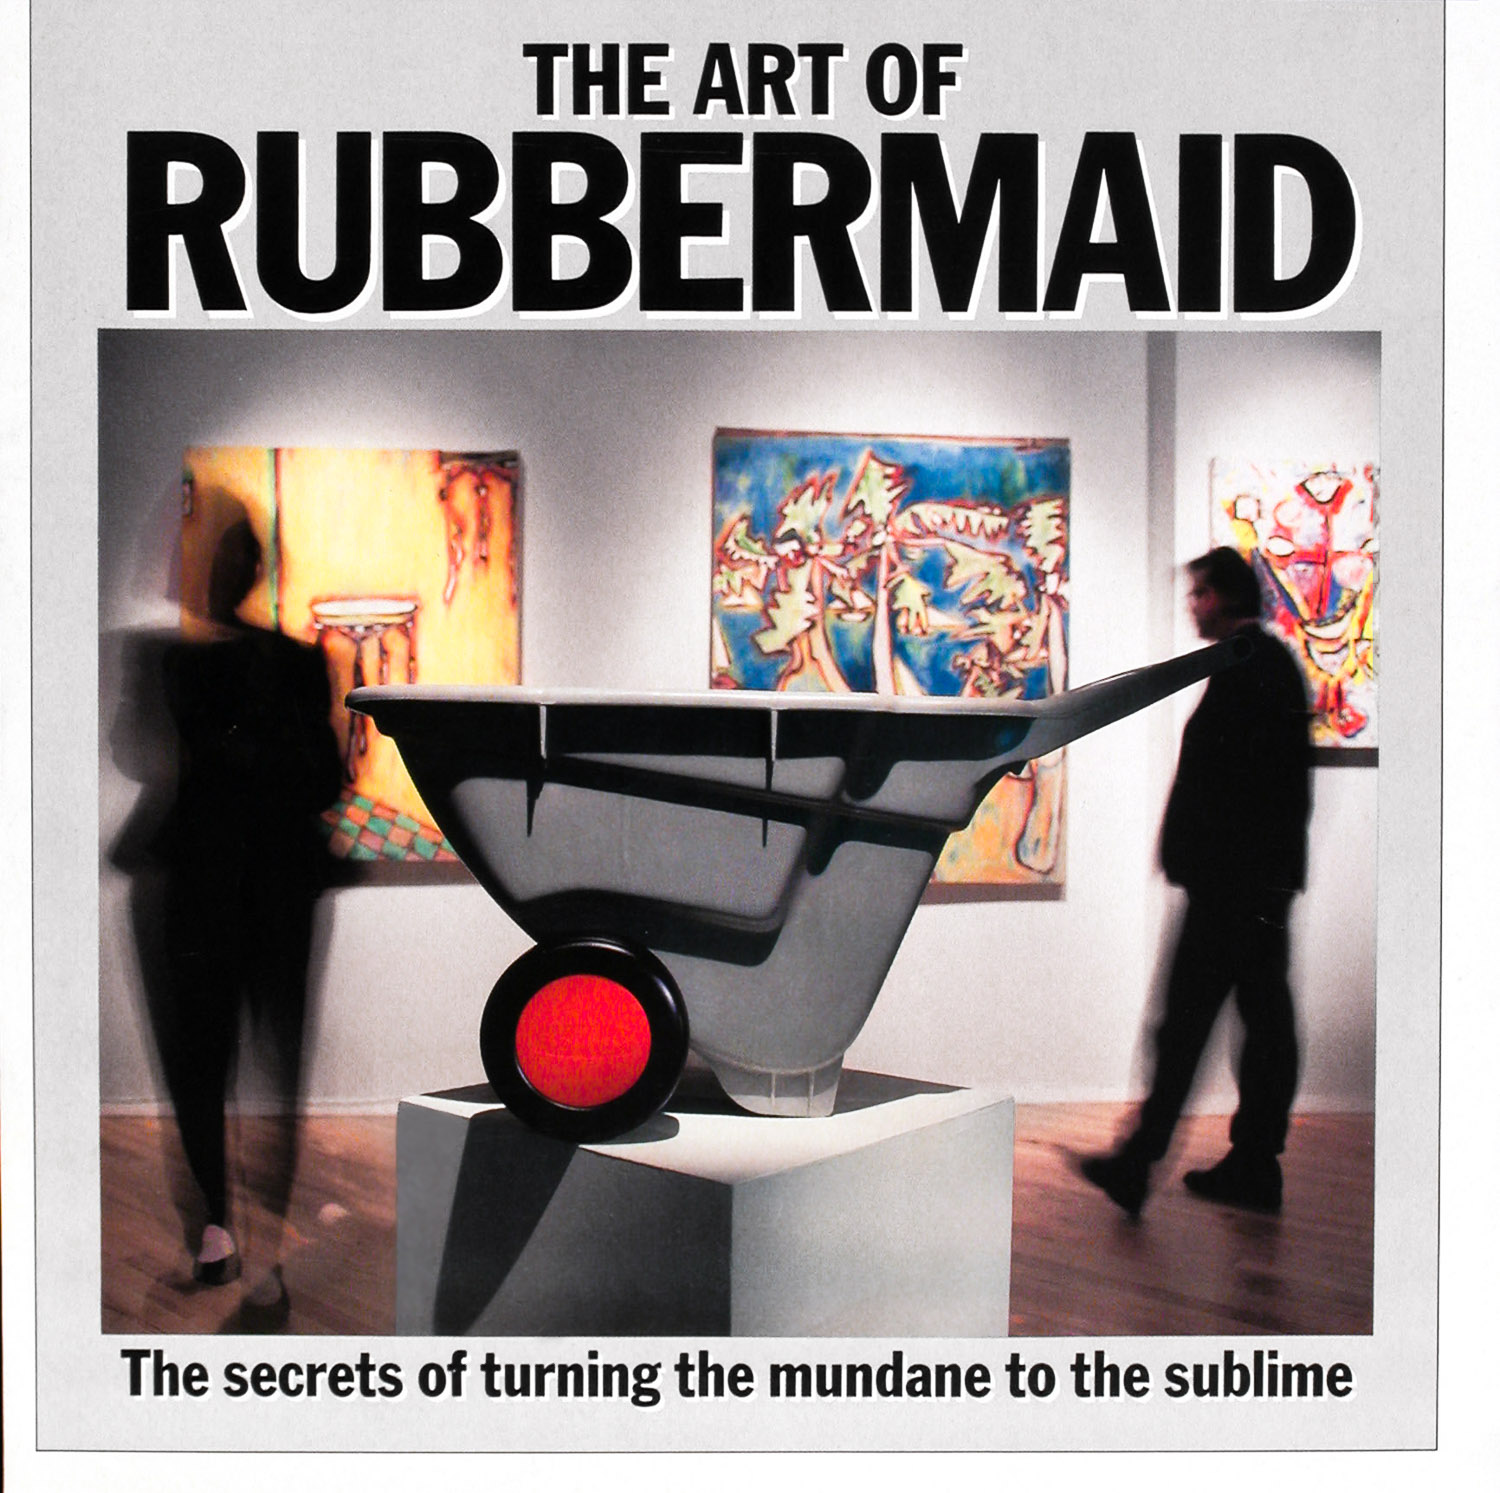 The Art of Rubbermaid